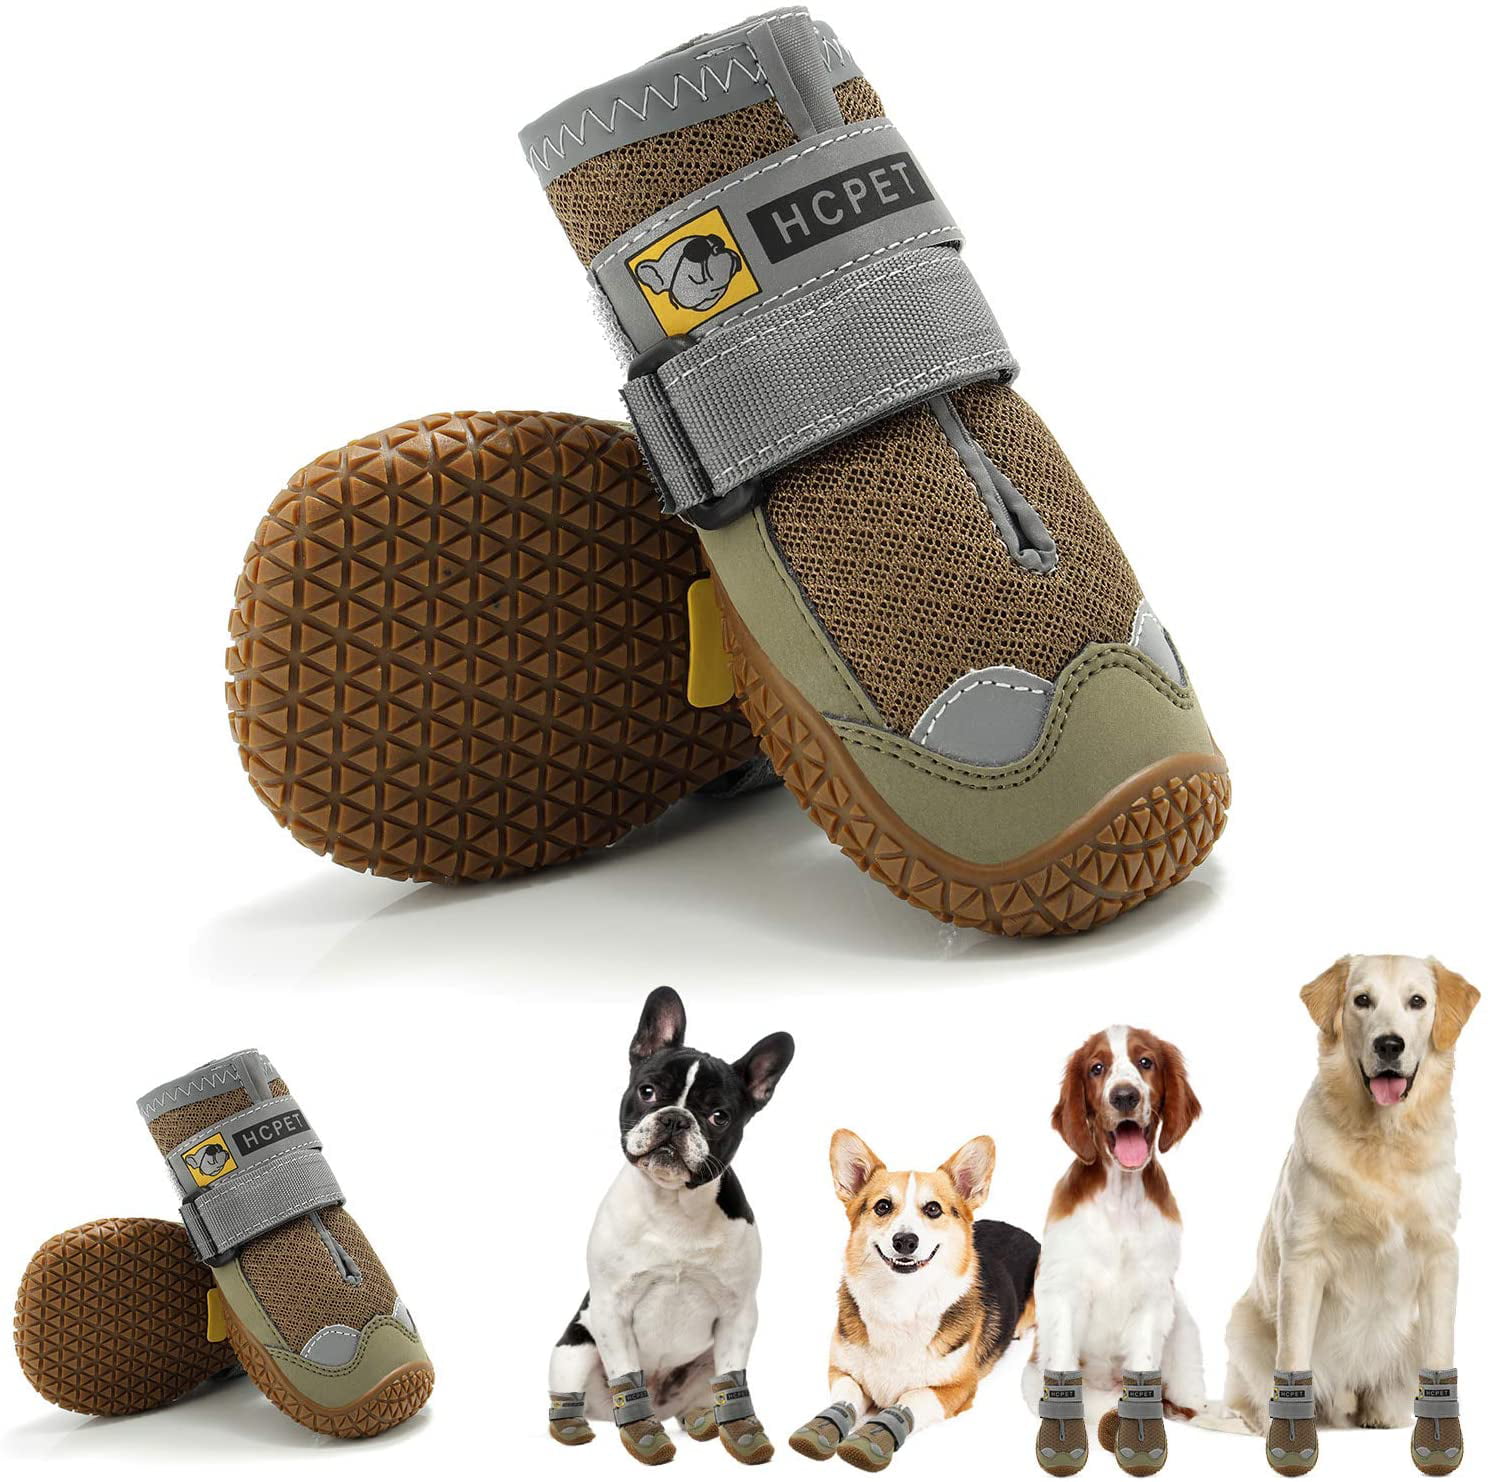 Running Hiking Swimming Dog Boots for Anti-Slip 4Pcs Heat Protection Dog Booties for Large Medium Small Dogs Paw Protector for Big Little Dogs with Full Size Dog Shoes for Large Dogs Hot Pavement 